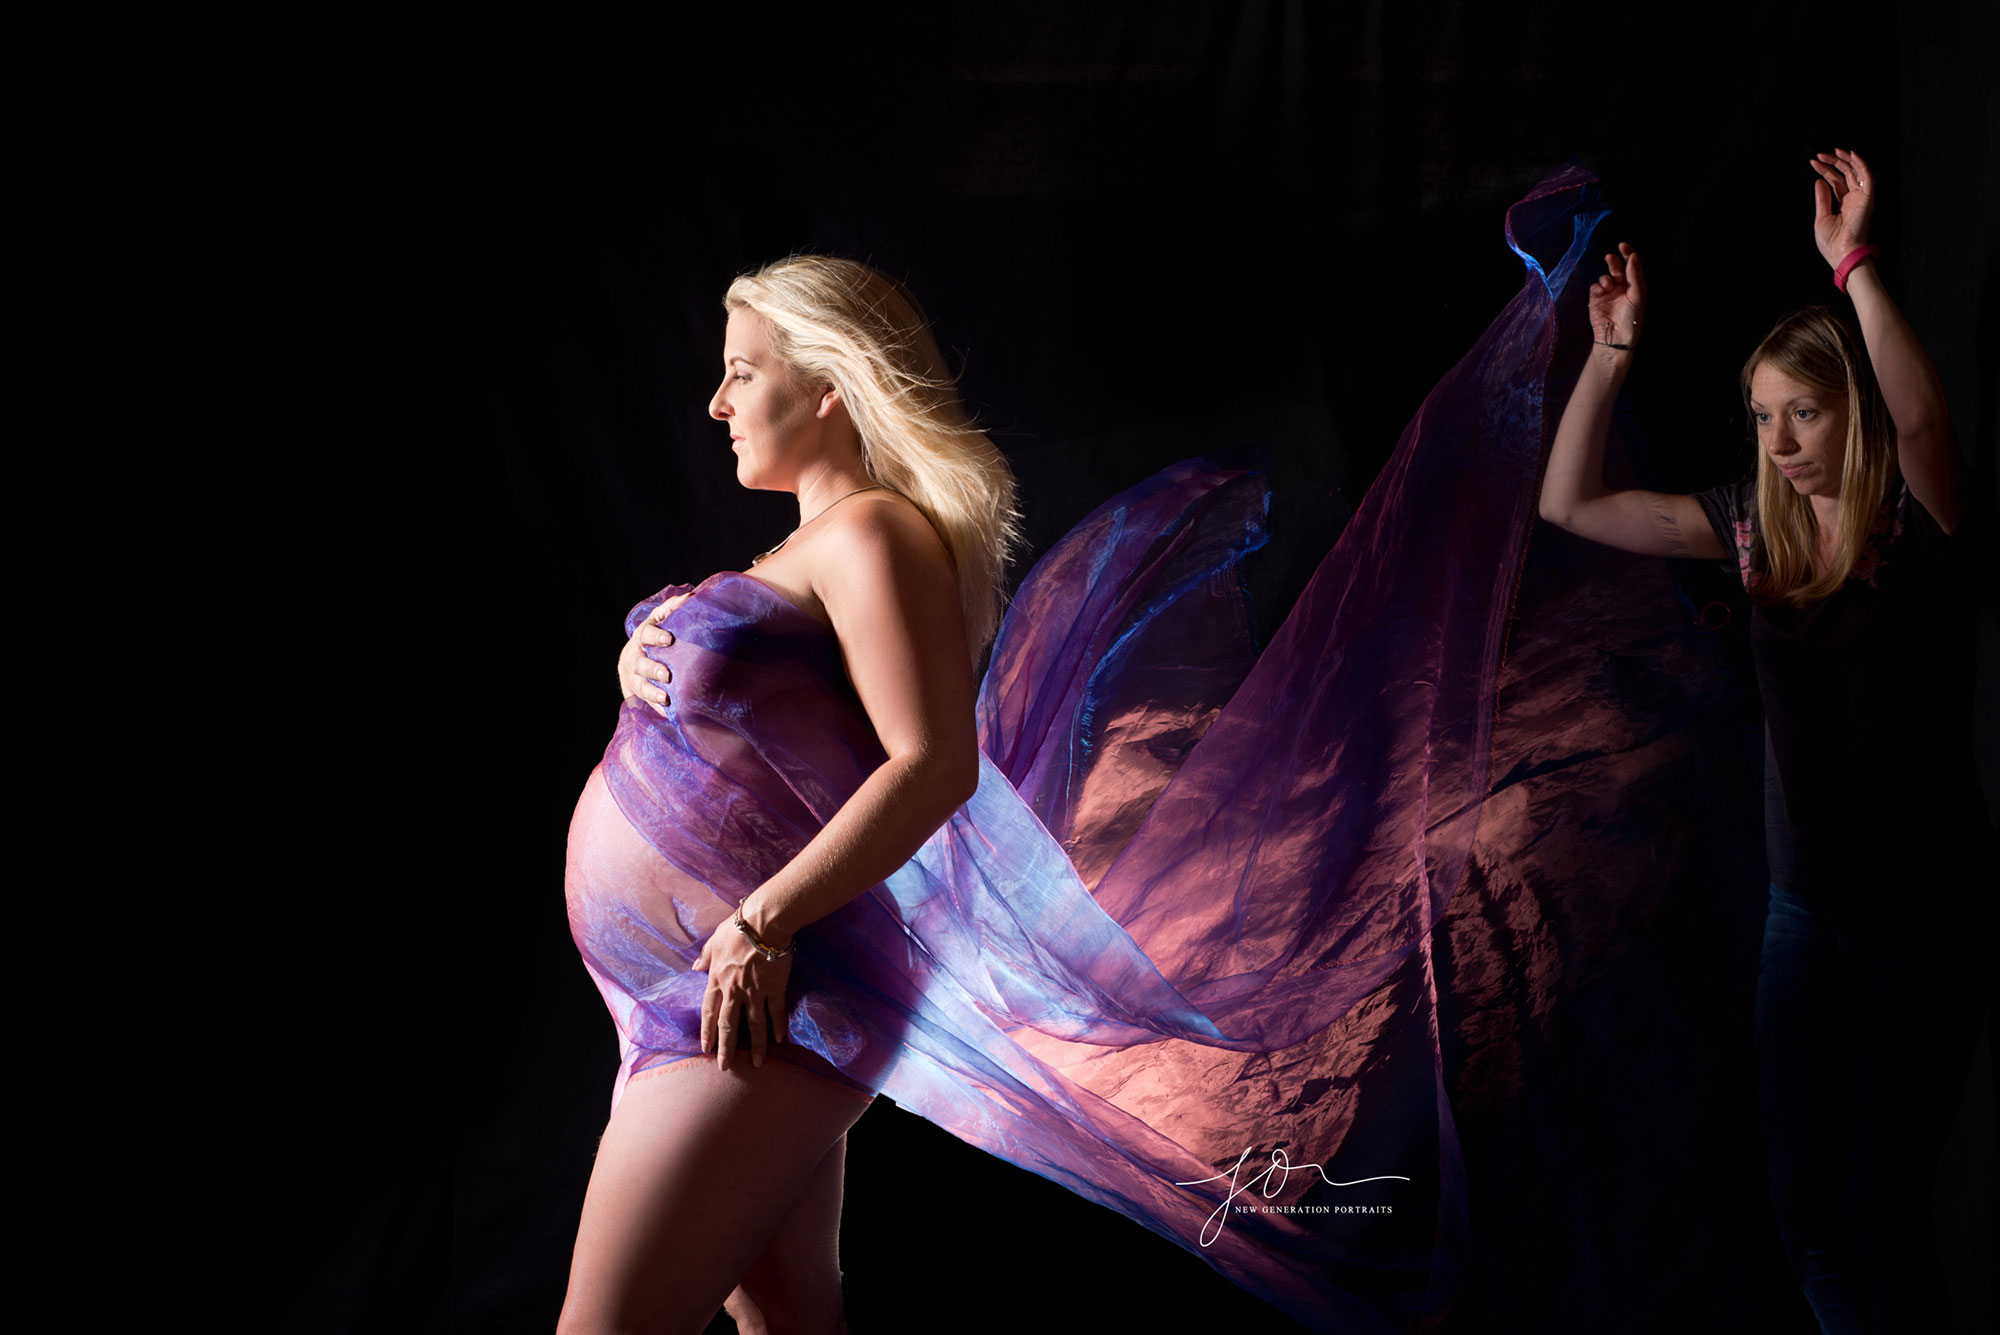 maternity behind the scenes throwing purple fabrics captured by New Generation Portraits Ltd